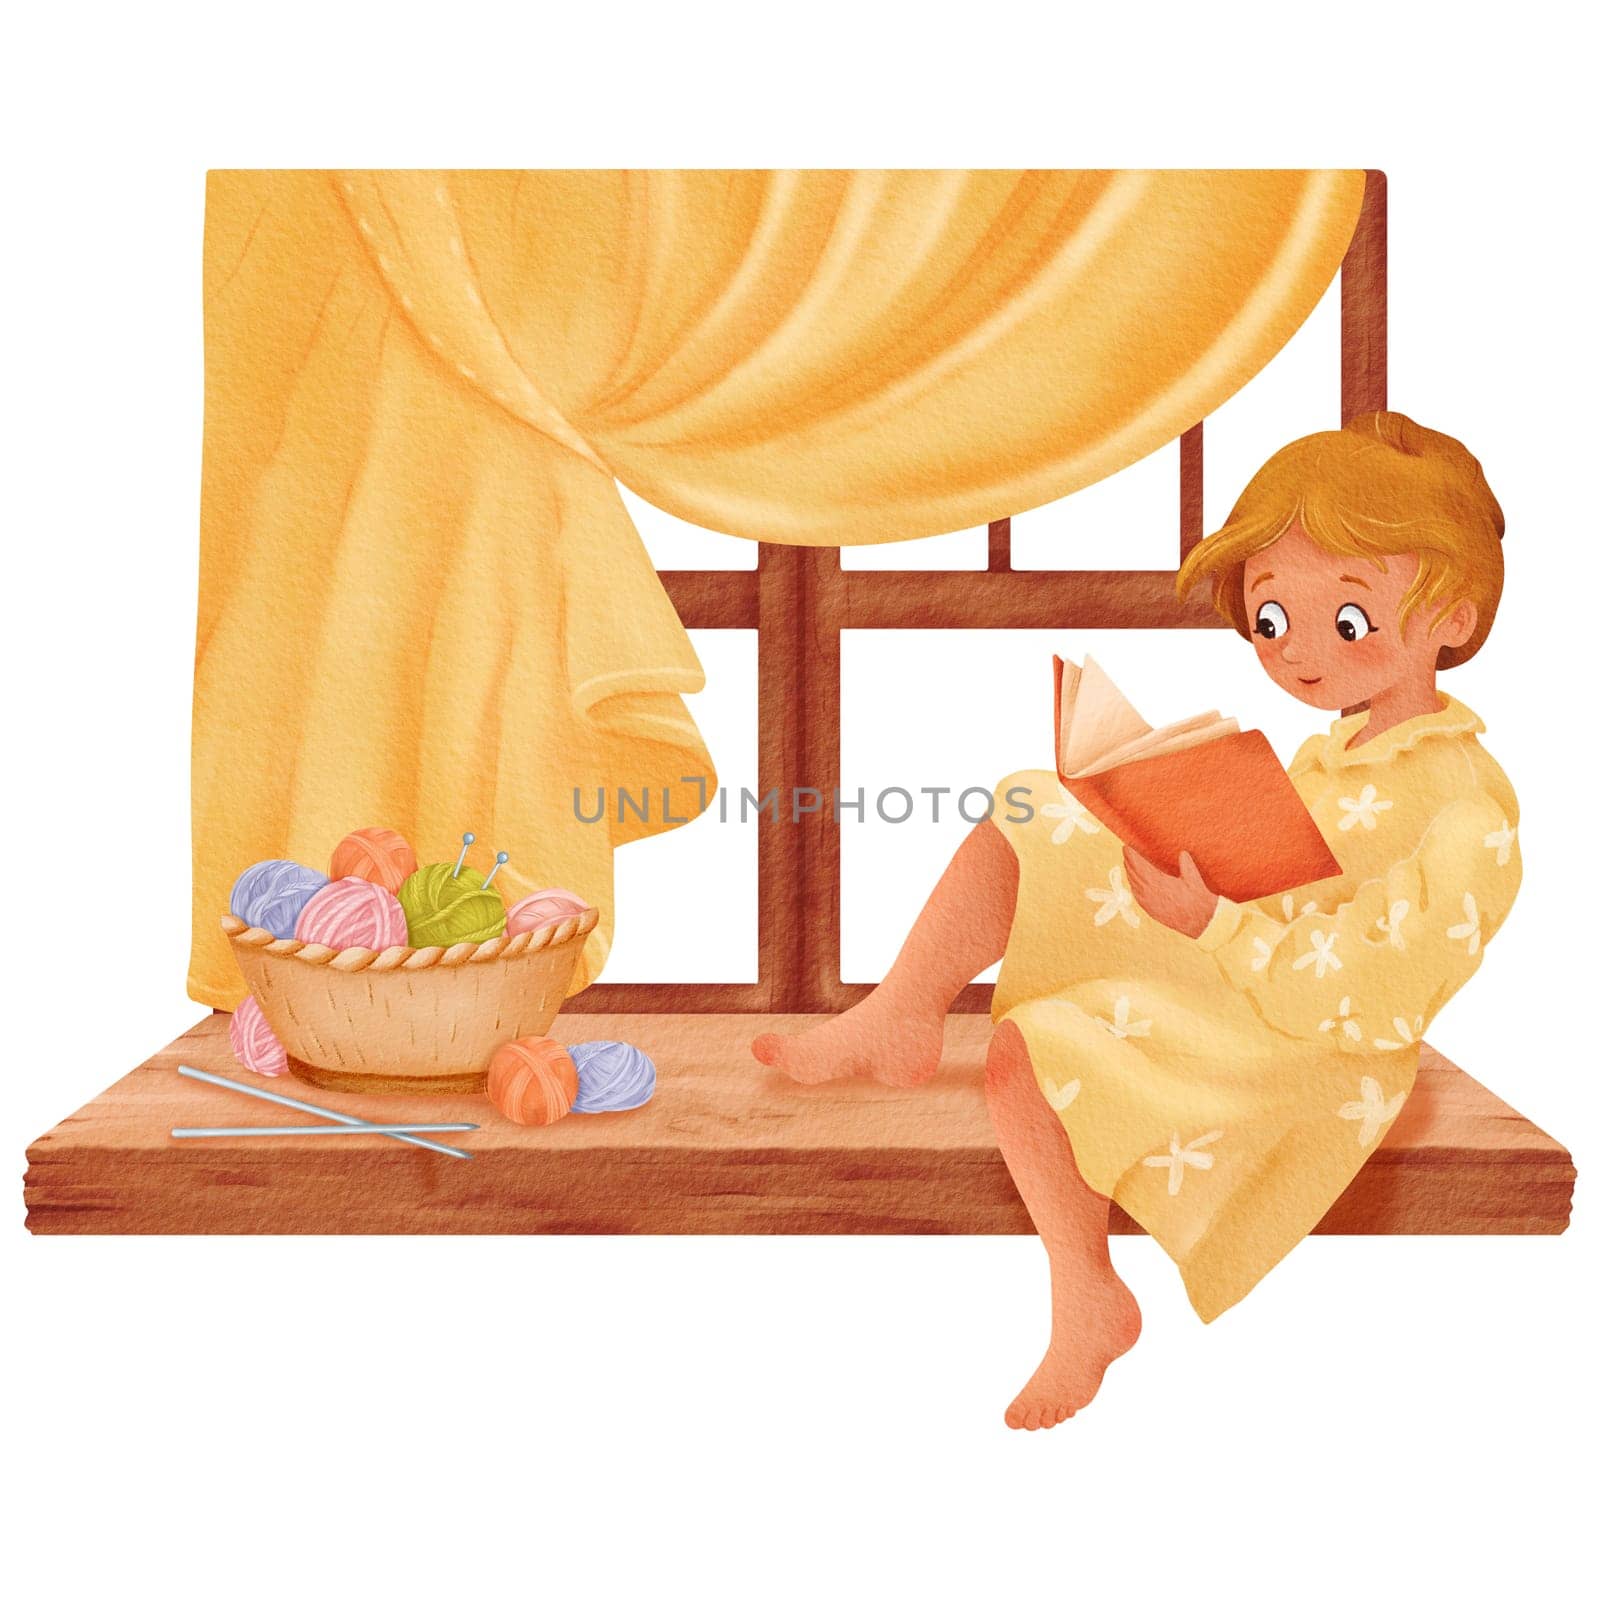 A composition portraying a girl seated by the window against a backdrop of satin curtains, a knitting book. A basket with multicolored yarn skeins on a wooden windowsill. Watercolor illustration.